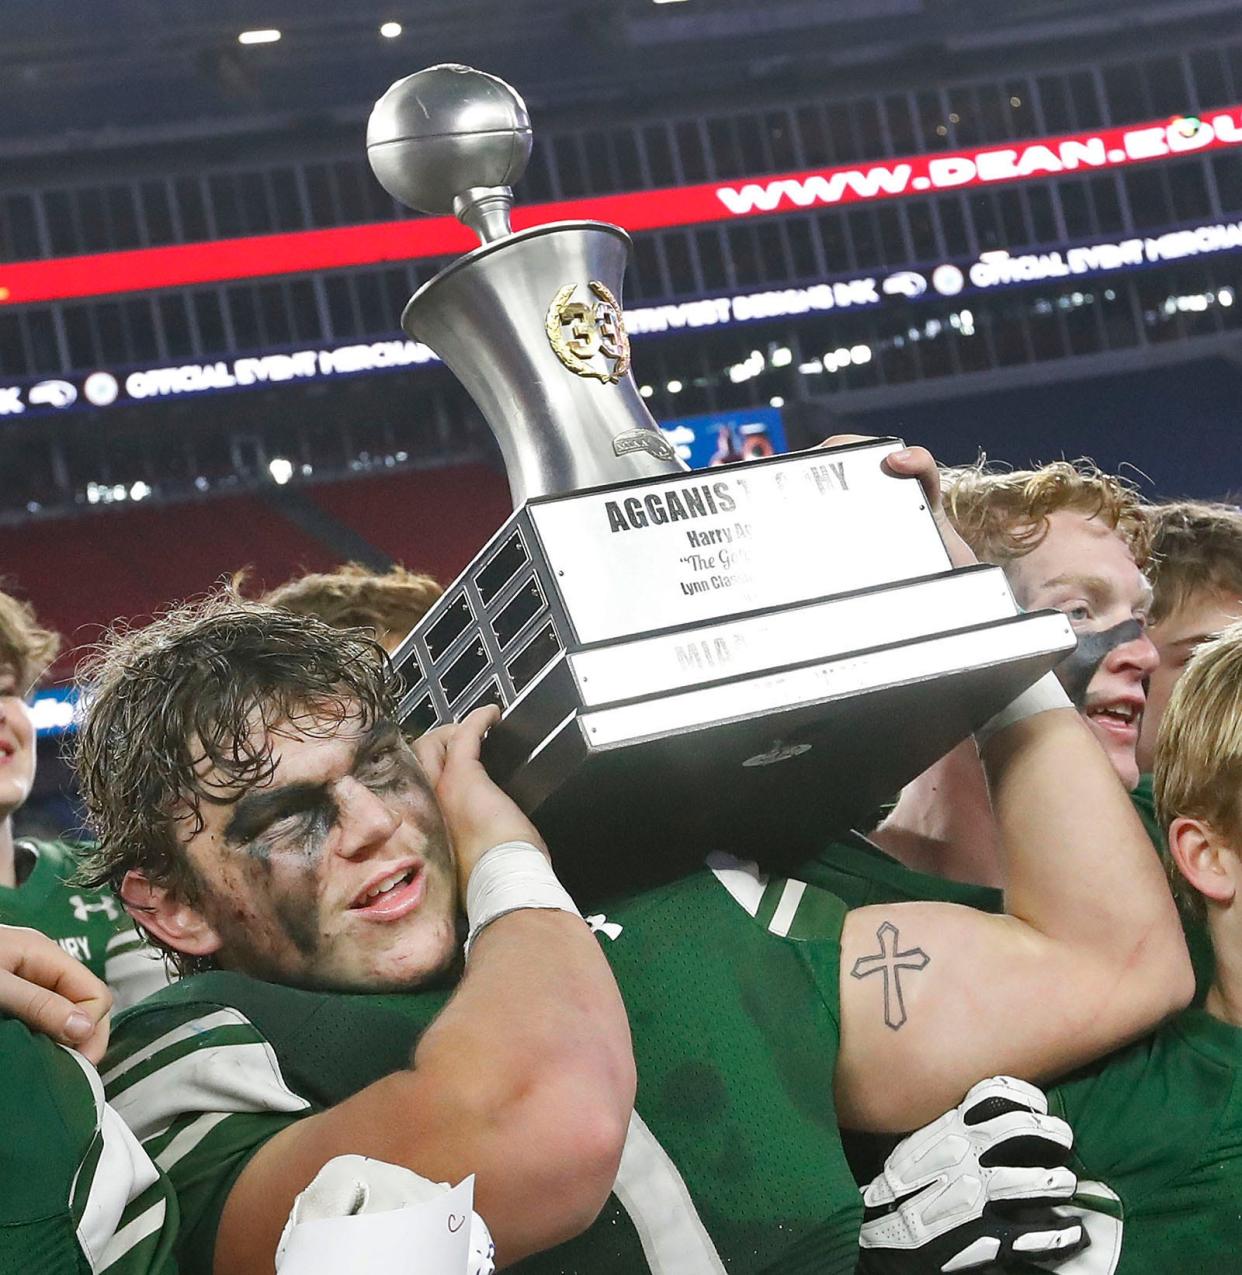 Duxbury wins the MIAA Div. 4 state championship behind the running game of Alex Barlow who scored five touchdowns. Barlow with the Agganis Trophy.

Duxbury High and Scituate High play the MIAA Division 4 State Championship at Gillette Stadium on Friday Dec. 1, 2023